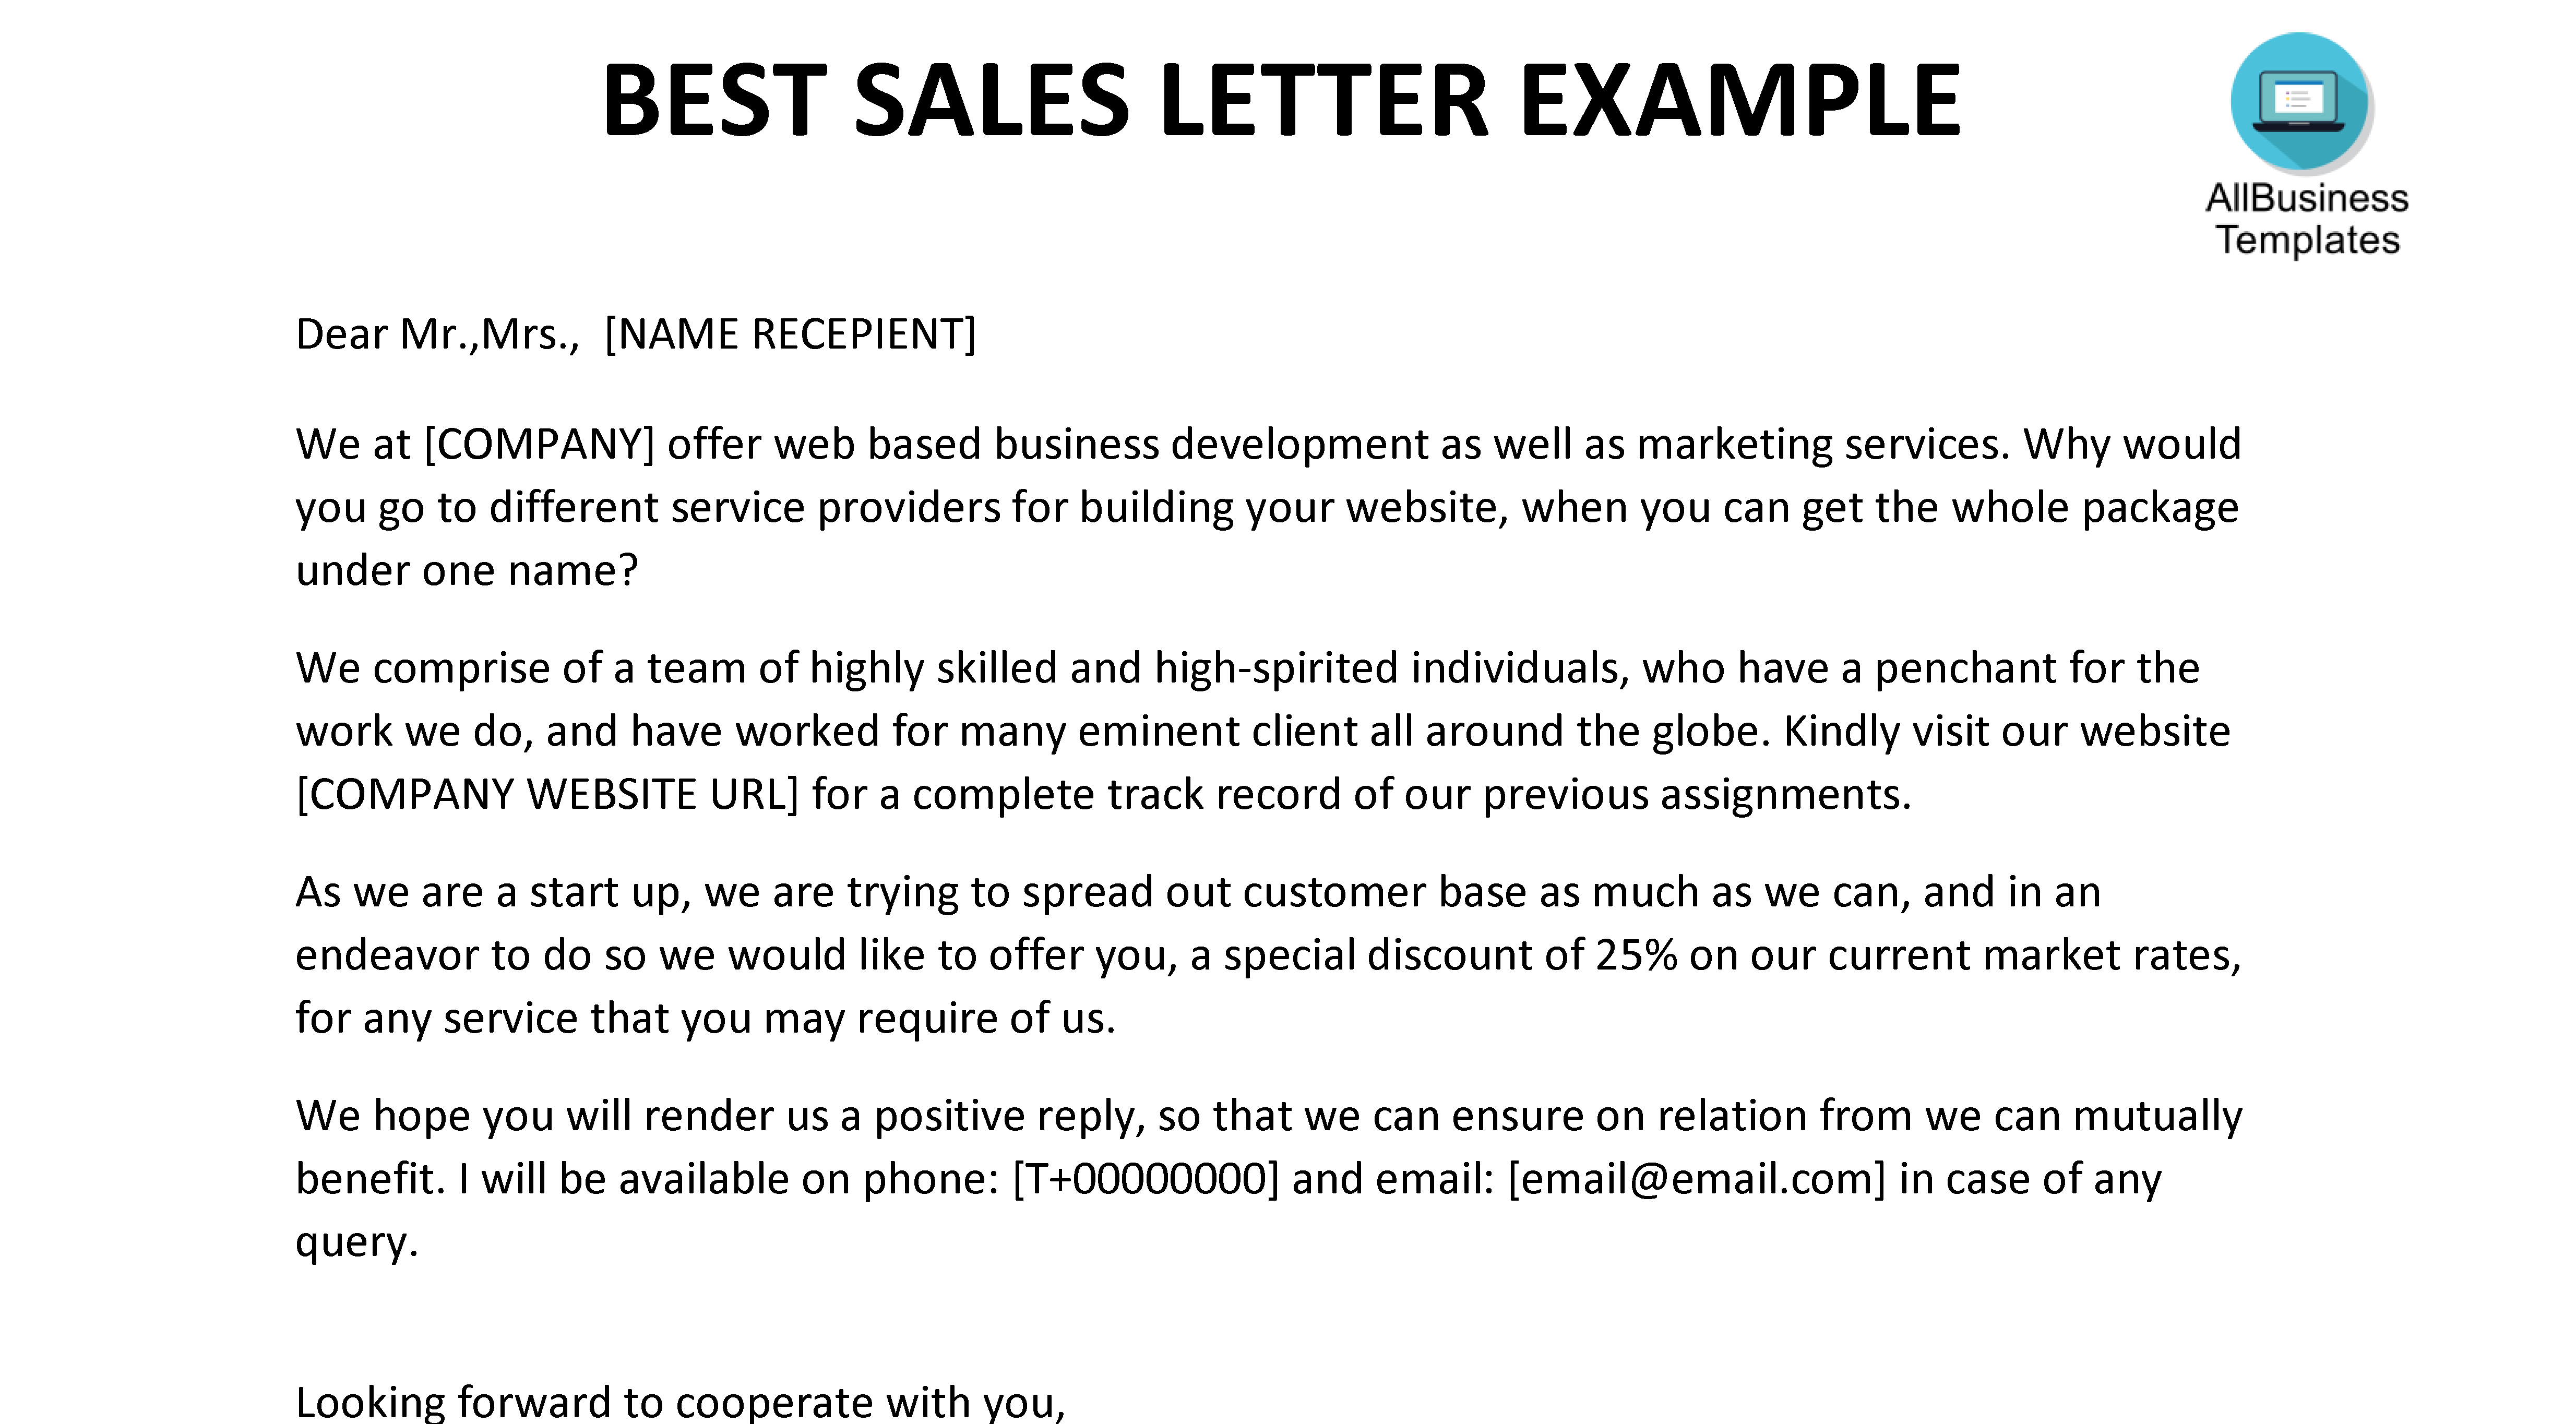 Sales Letter Example main image